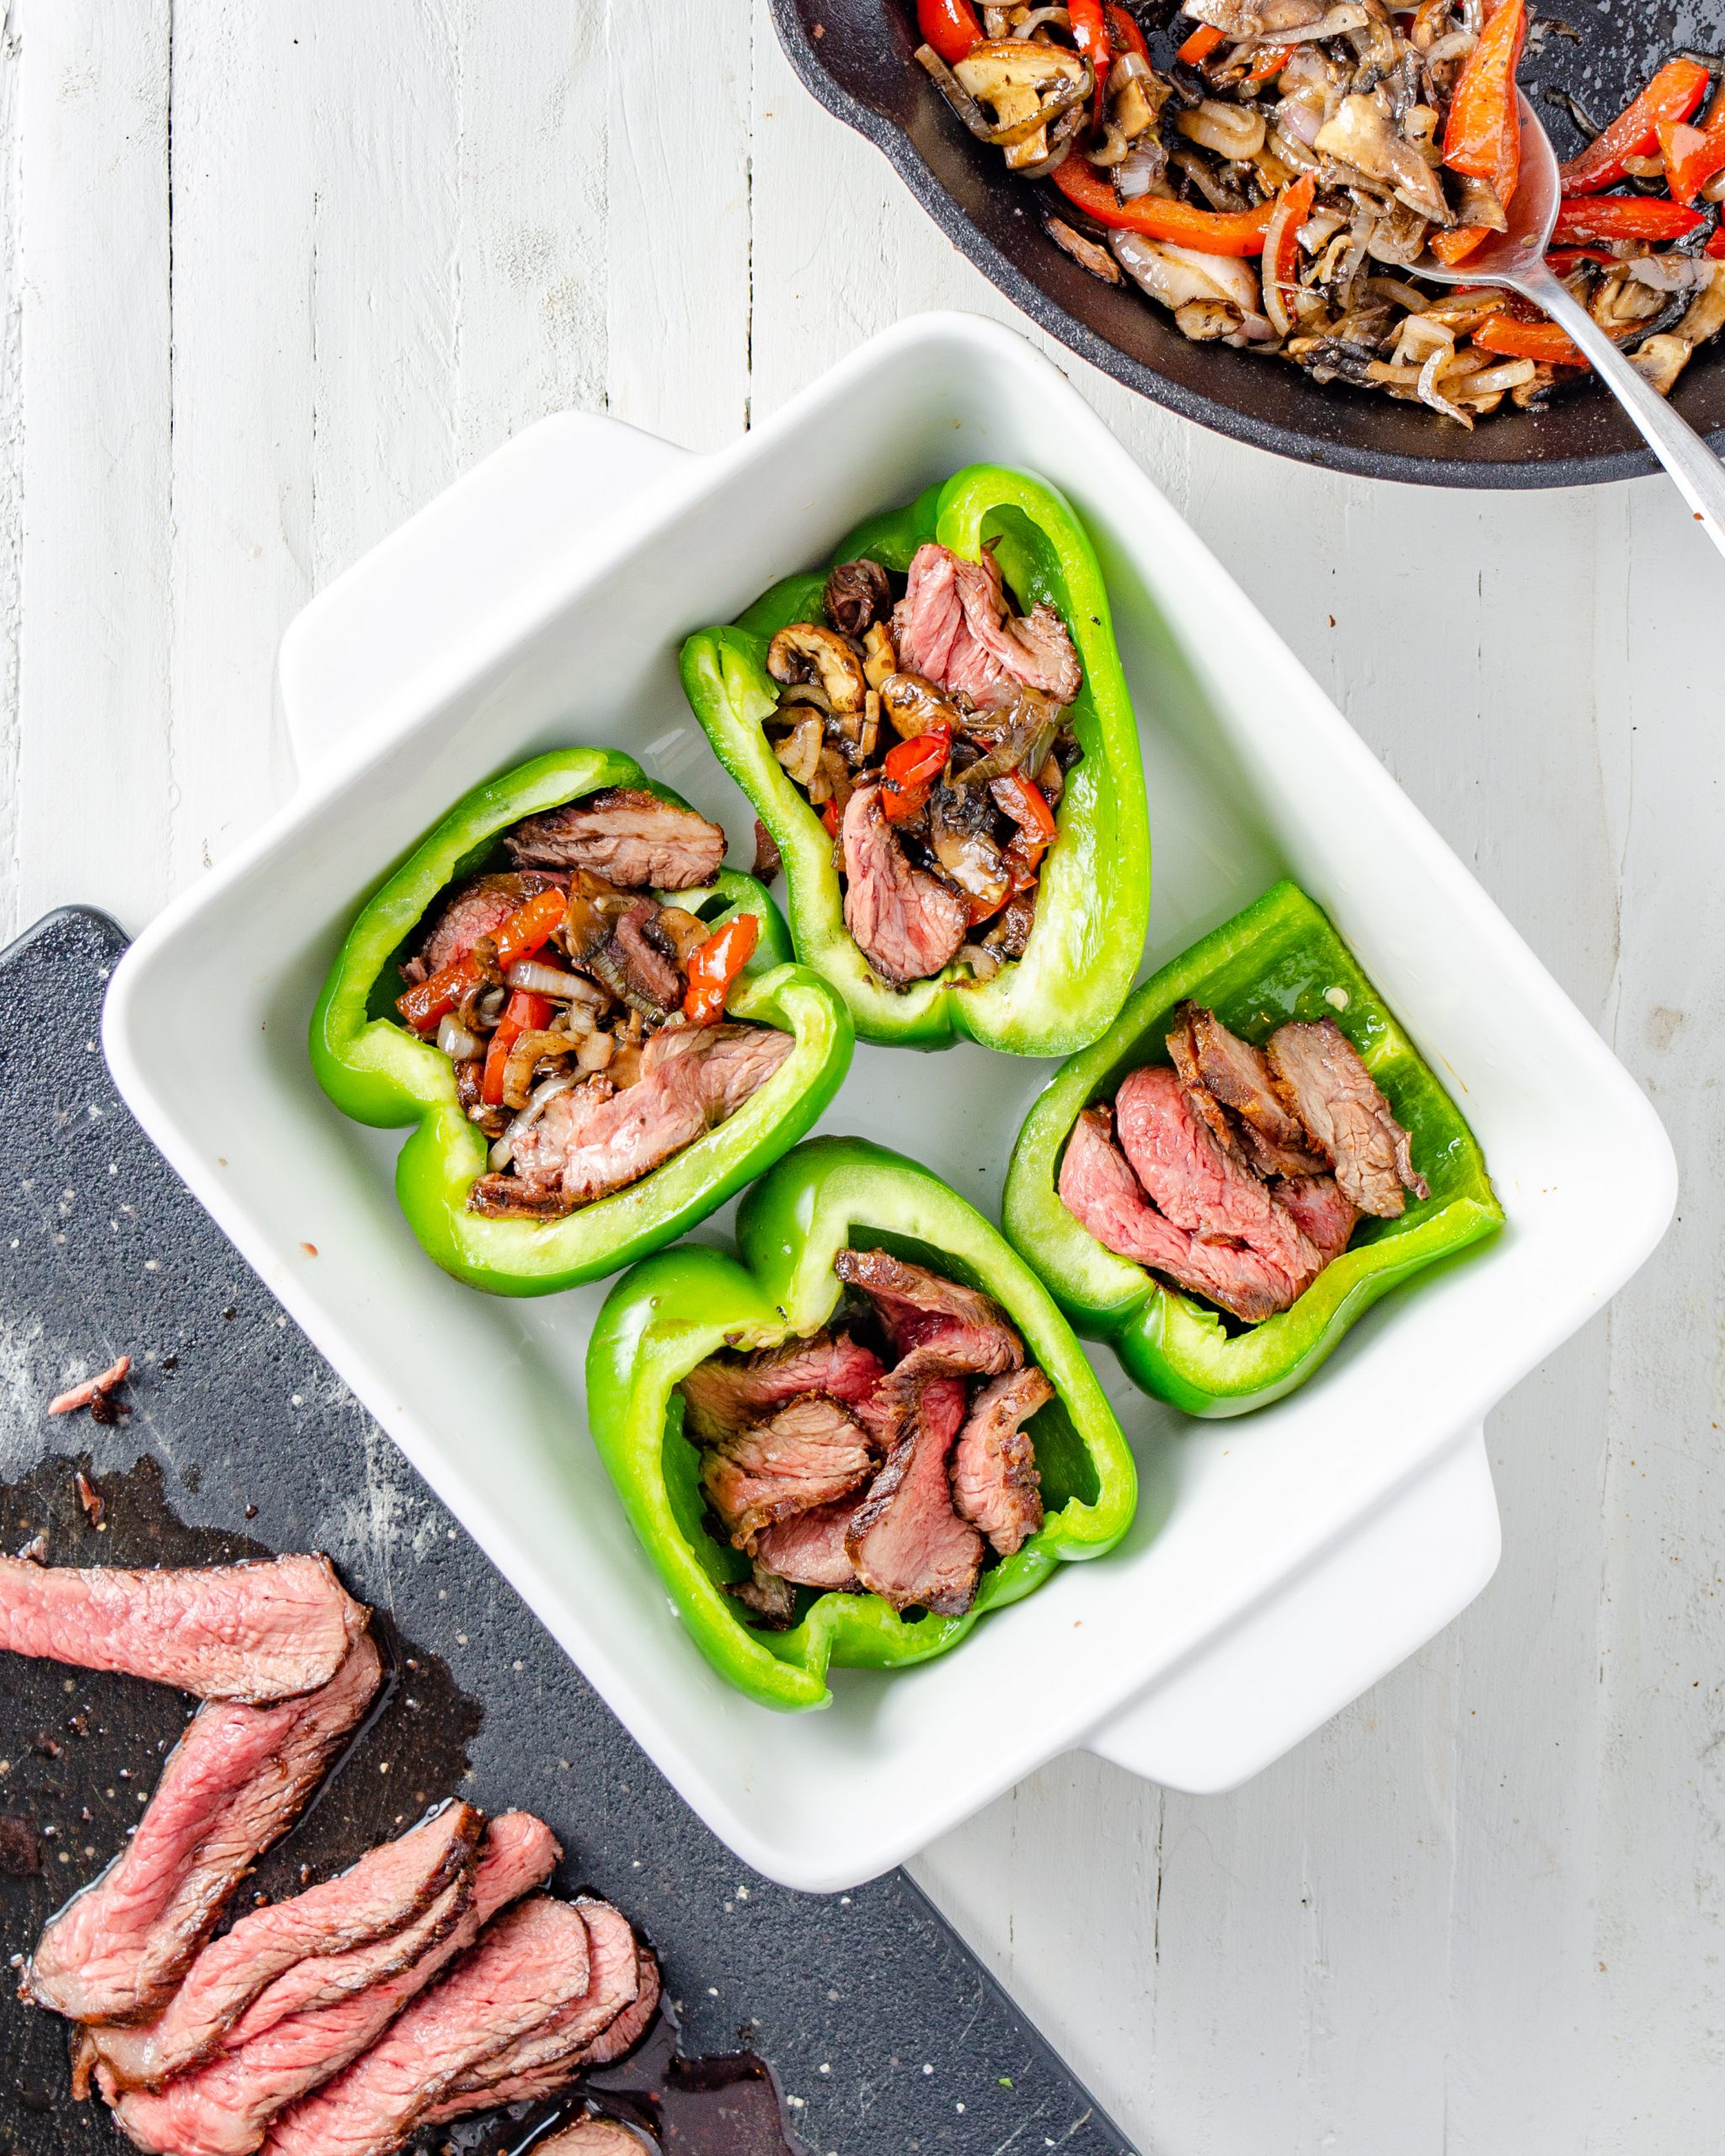 Take the green peppers out of the oven, and fill them with the steak and vegetable mixture. 